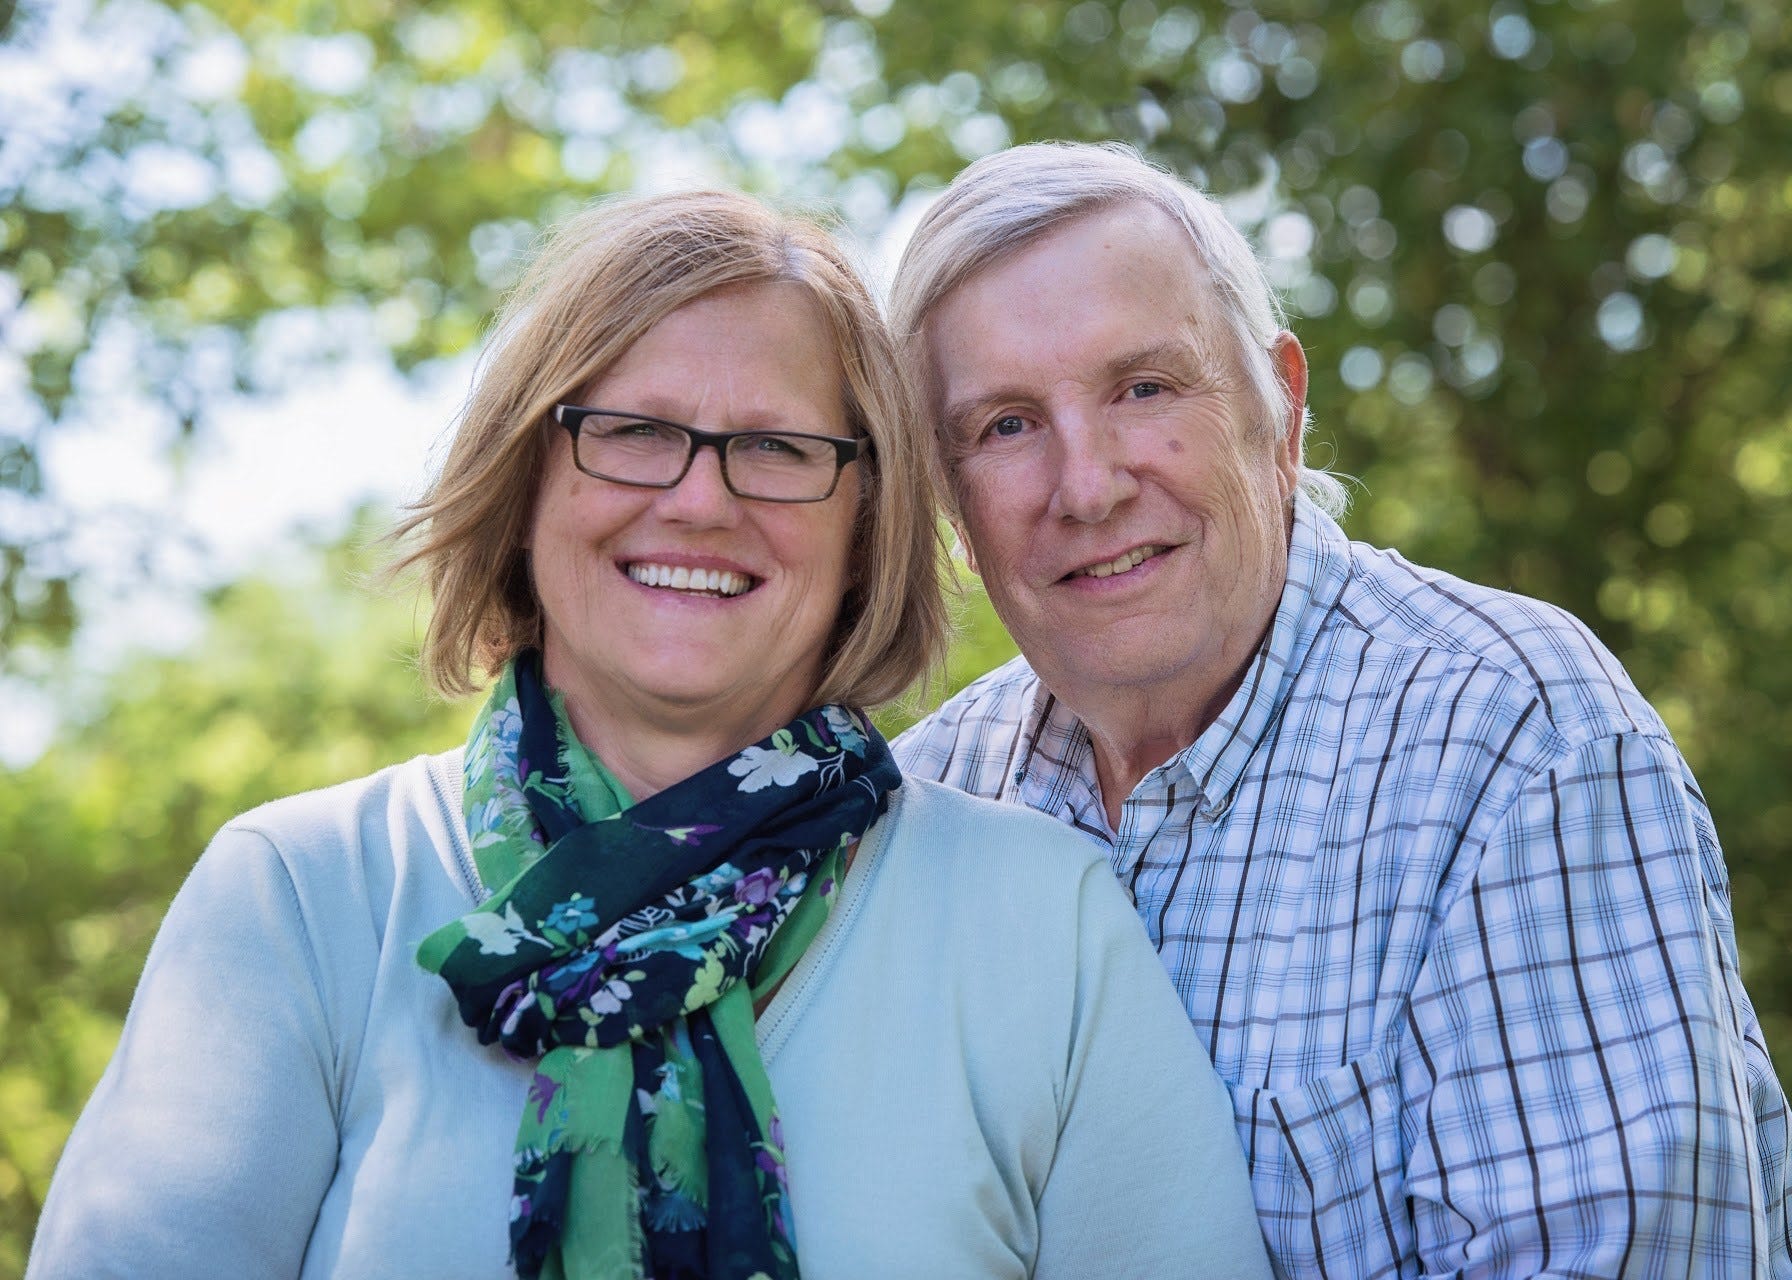 Daniel Boon and his wife, Marlene, pose for a photo in summer 2019. Daniel died of COVID-19 on Sept. 26.